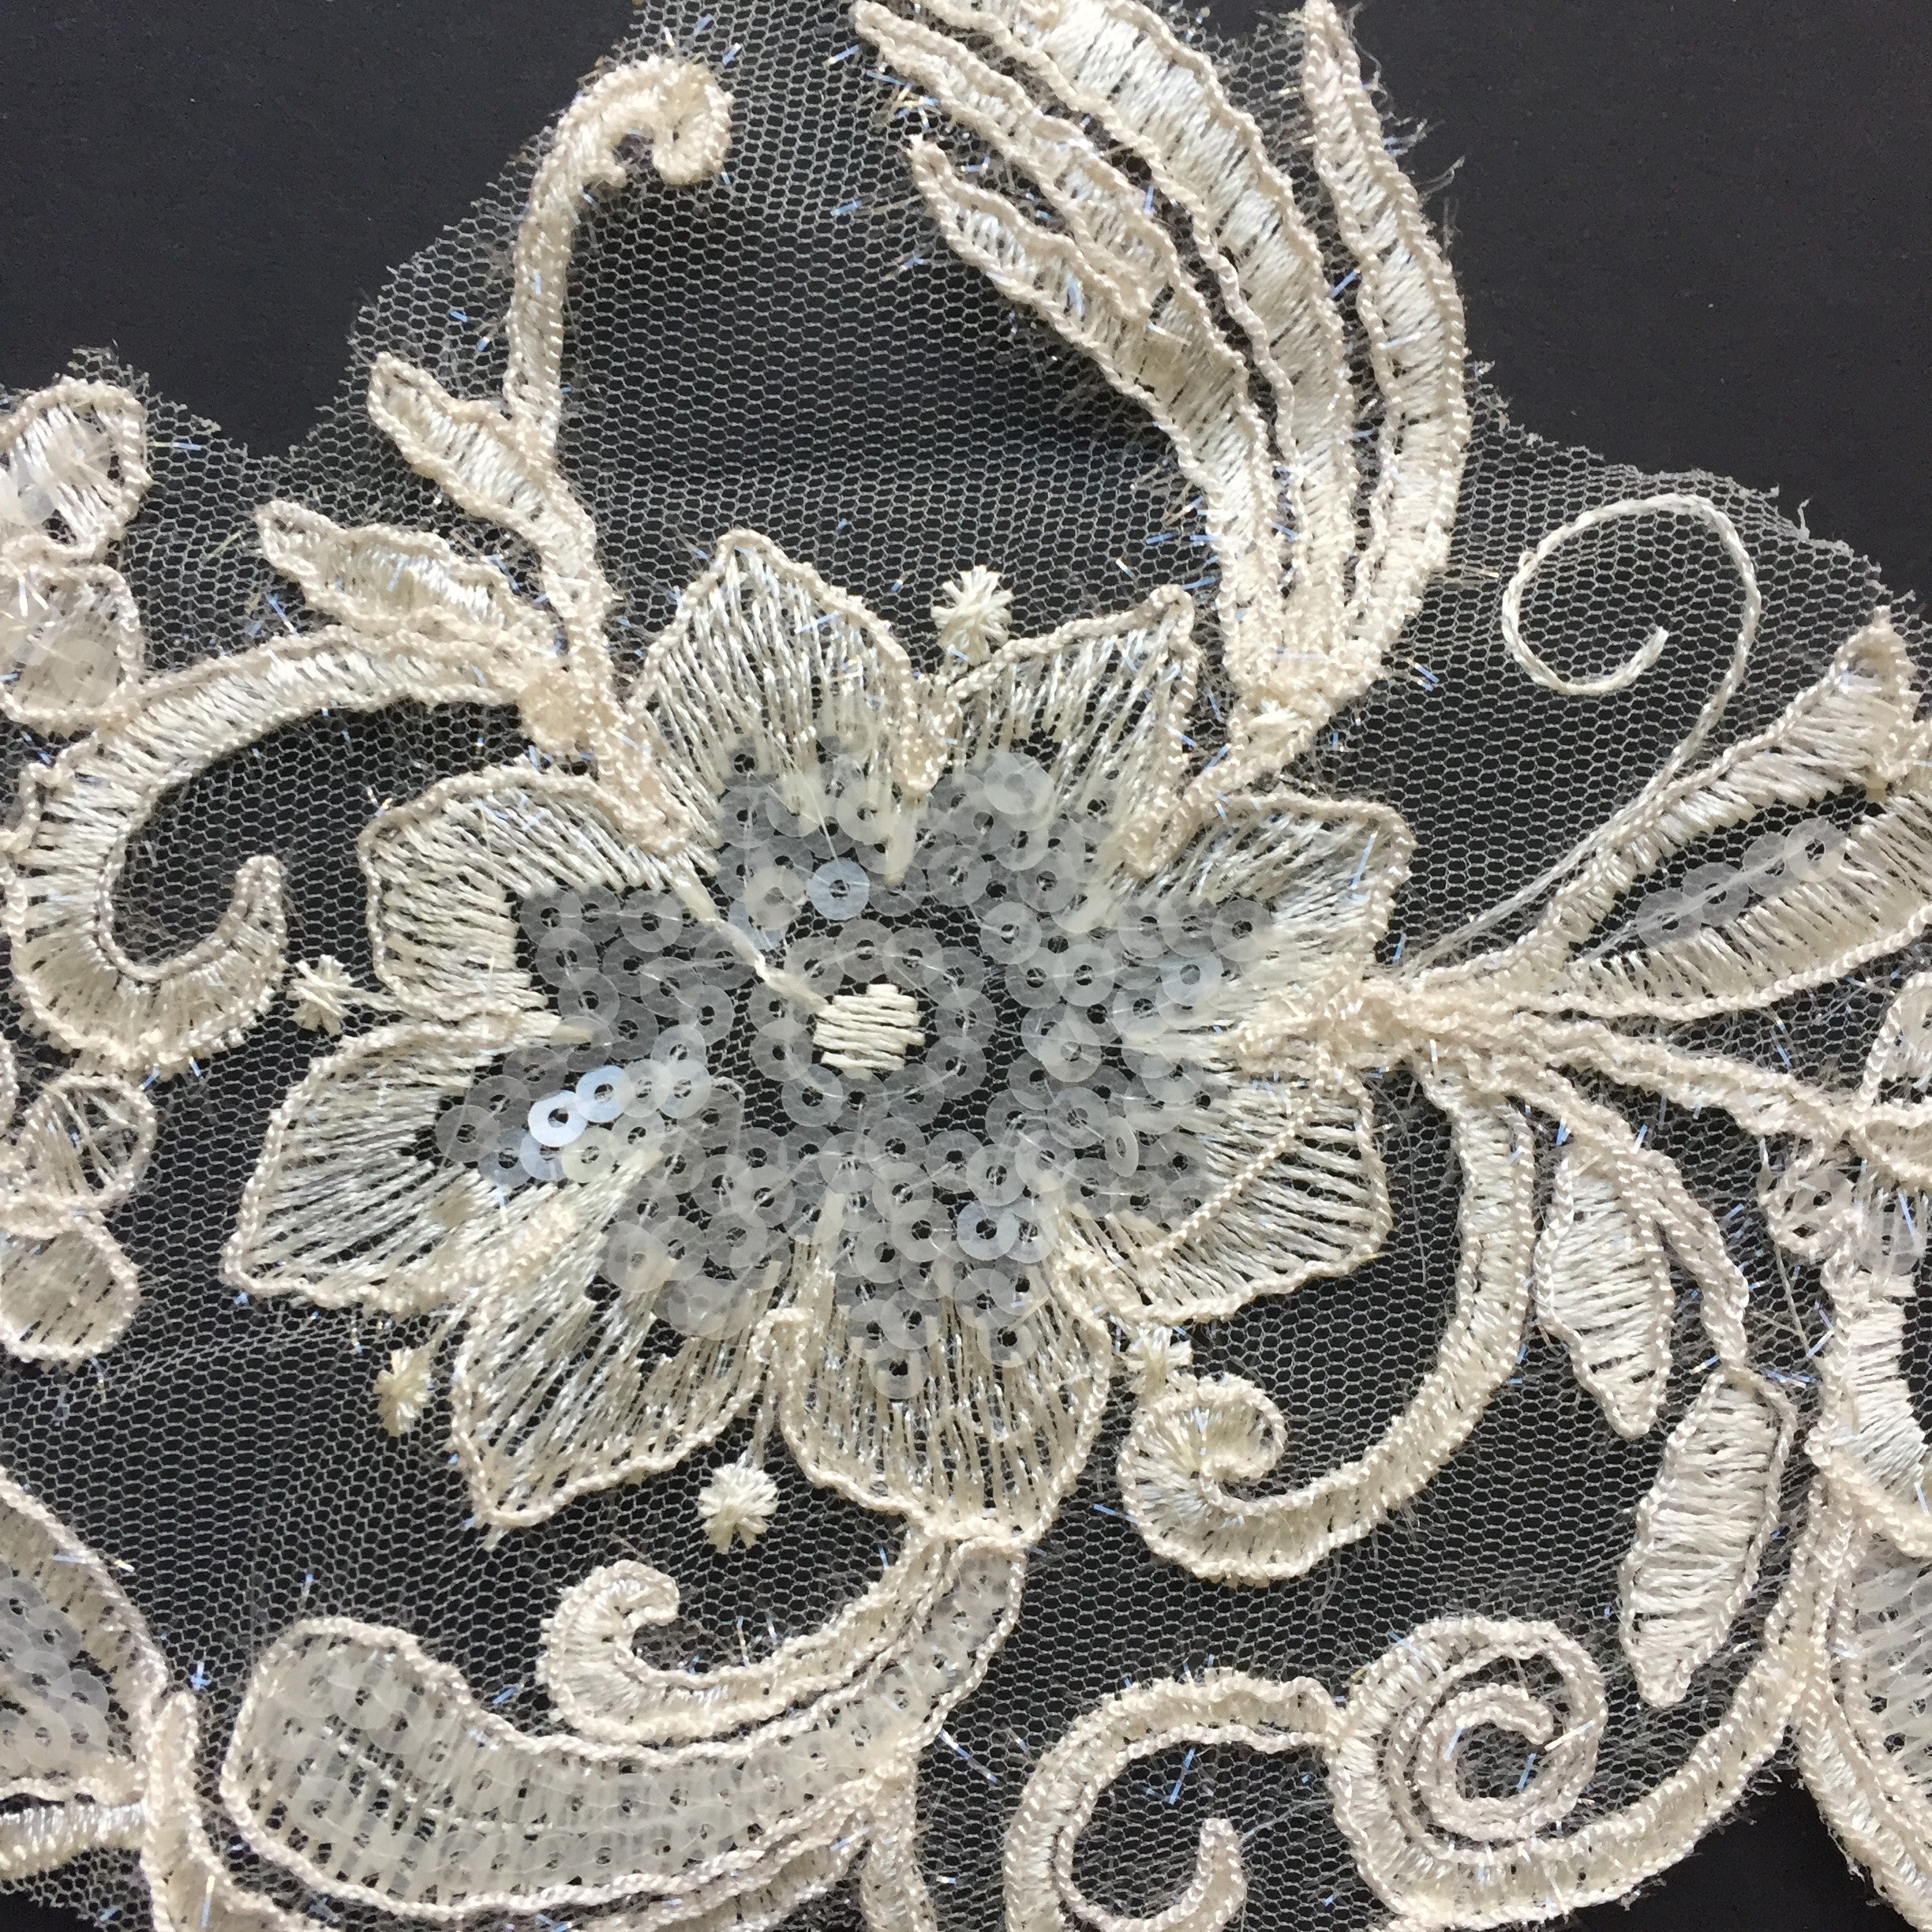 Small white opaque sequins fill the flower centres and leaf shapes.  Sparkly eyelash thread borders the outer edge of each motif.  